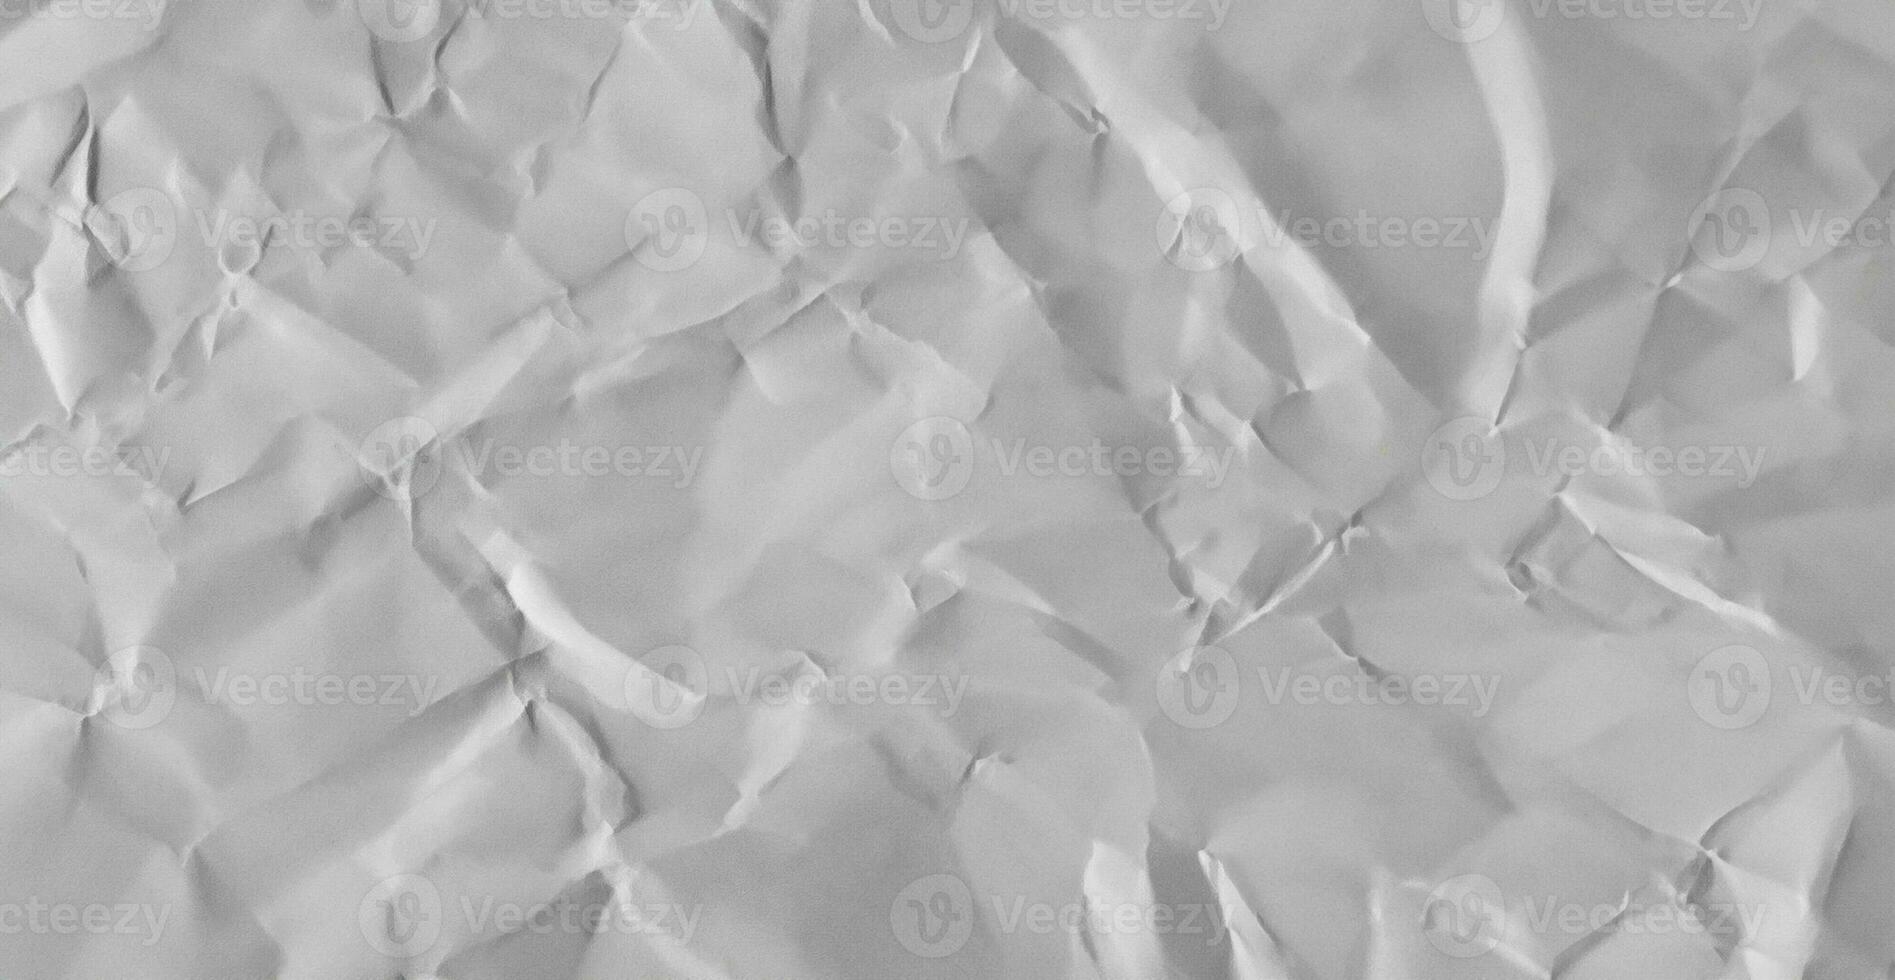 Design space paper textured background photo